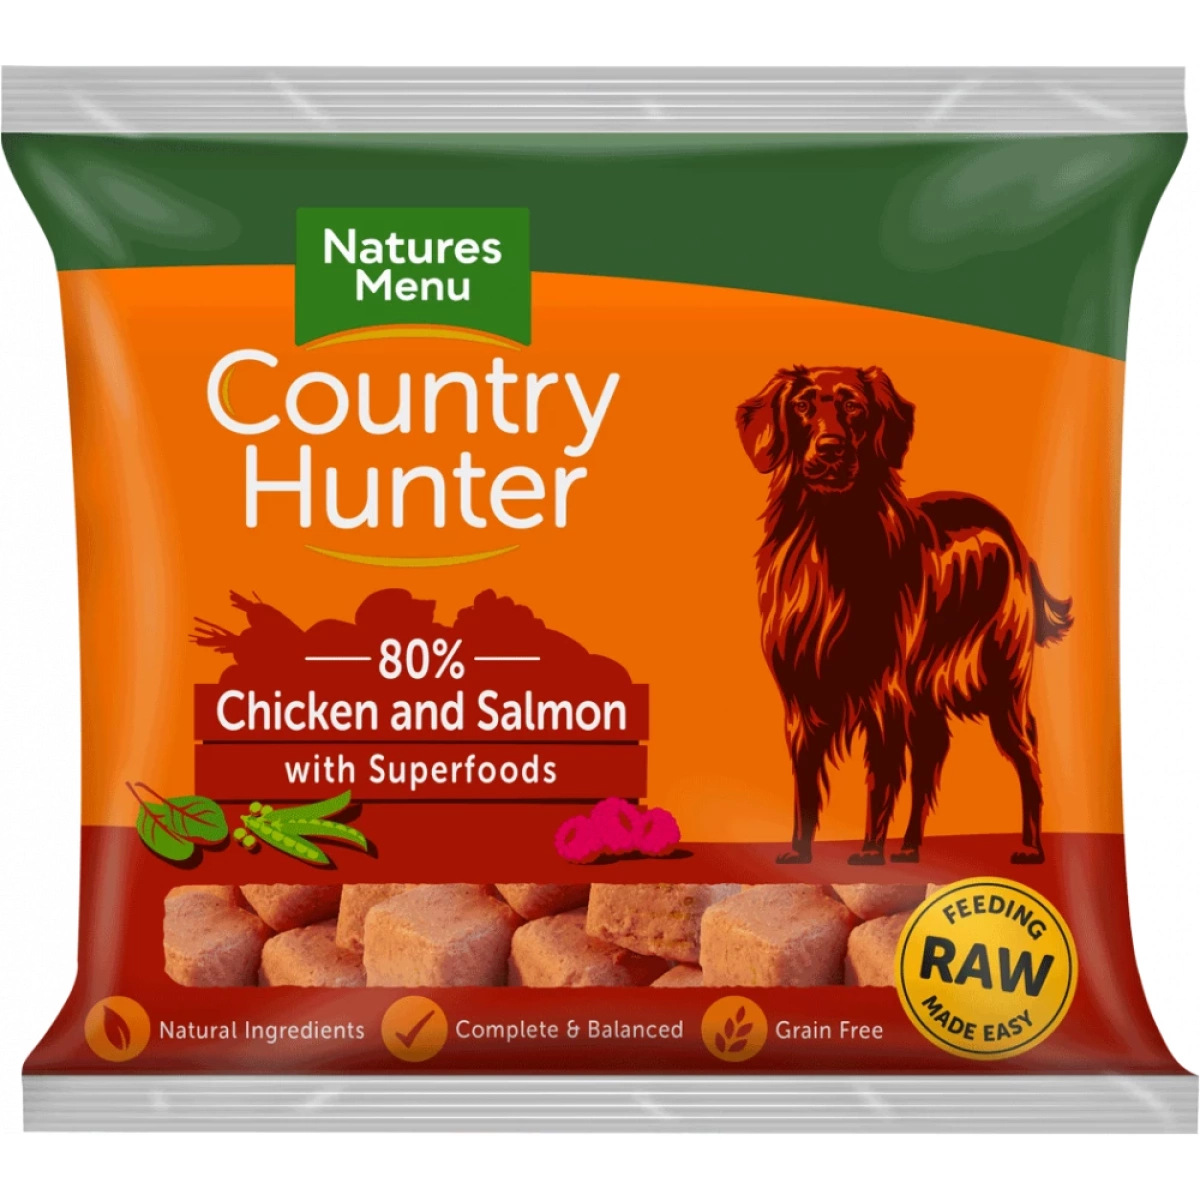 Country Hunter Nuggets 1kg – Chicken & Salmon – Pawfect Supplies Ltd Product Image